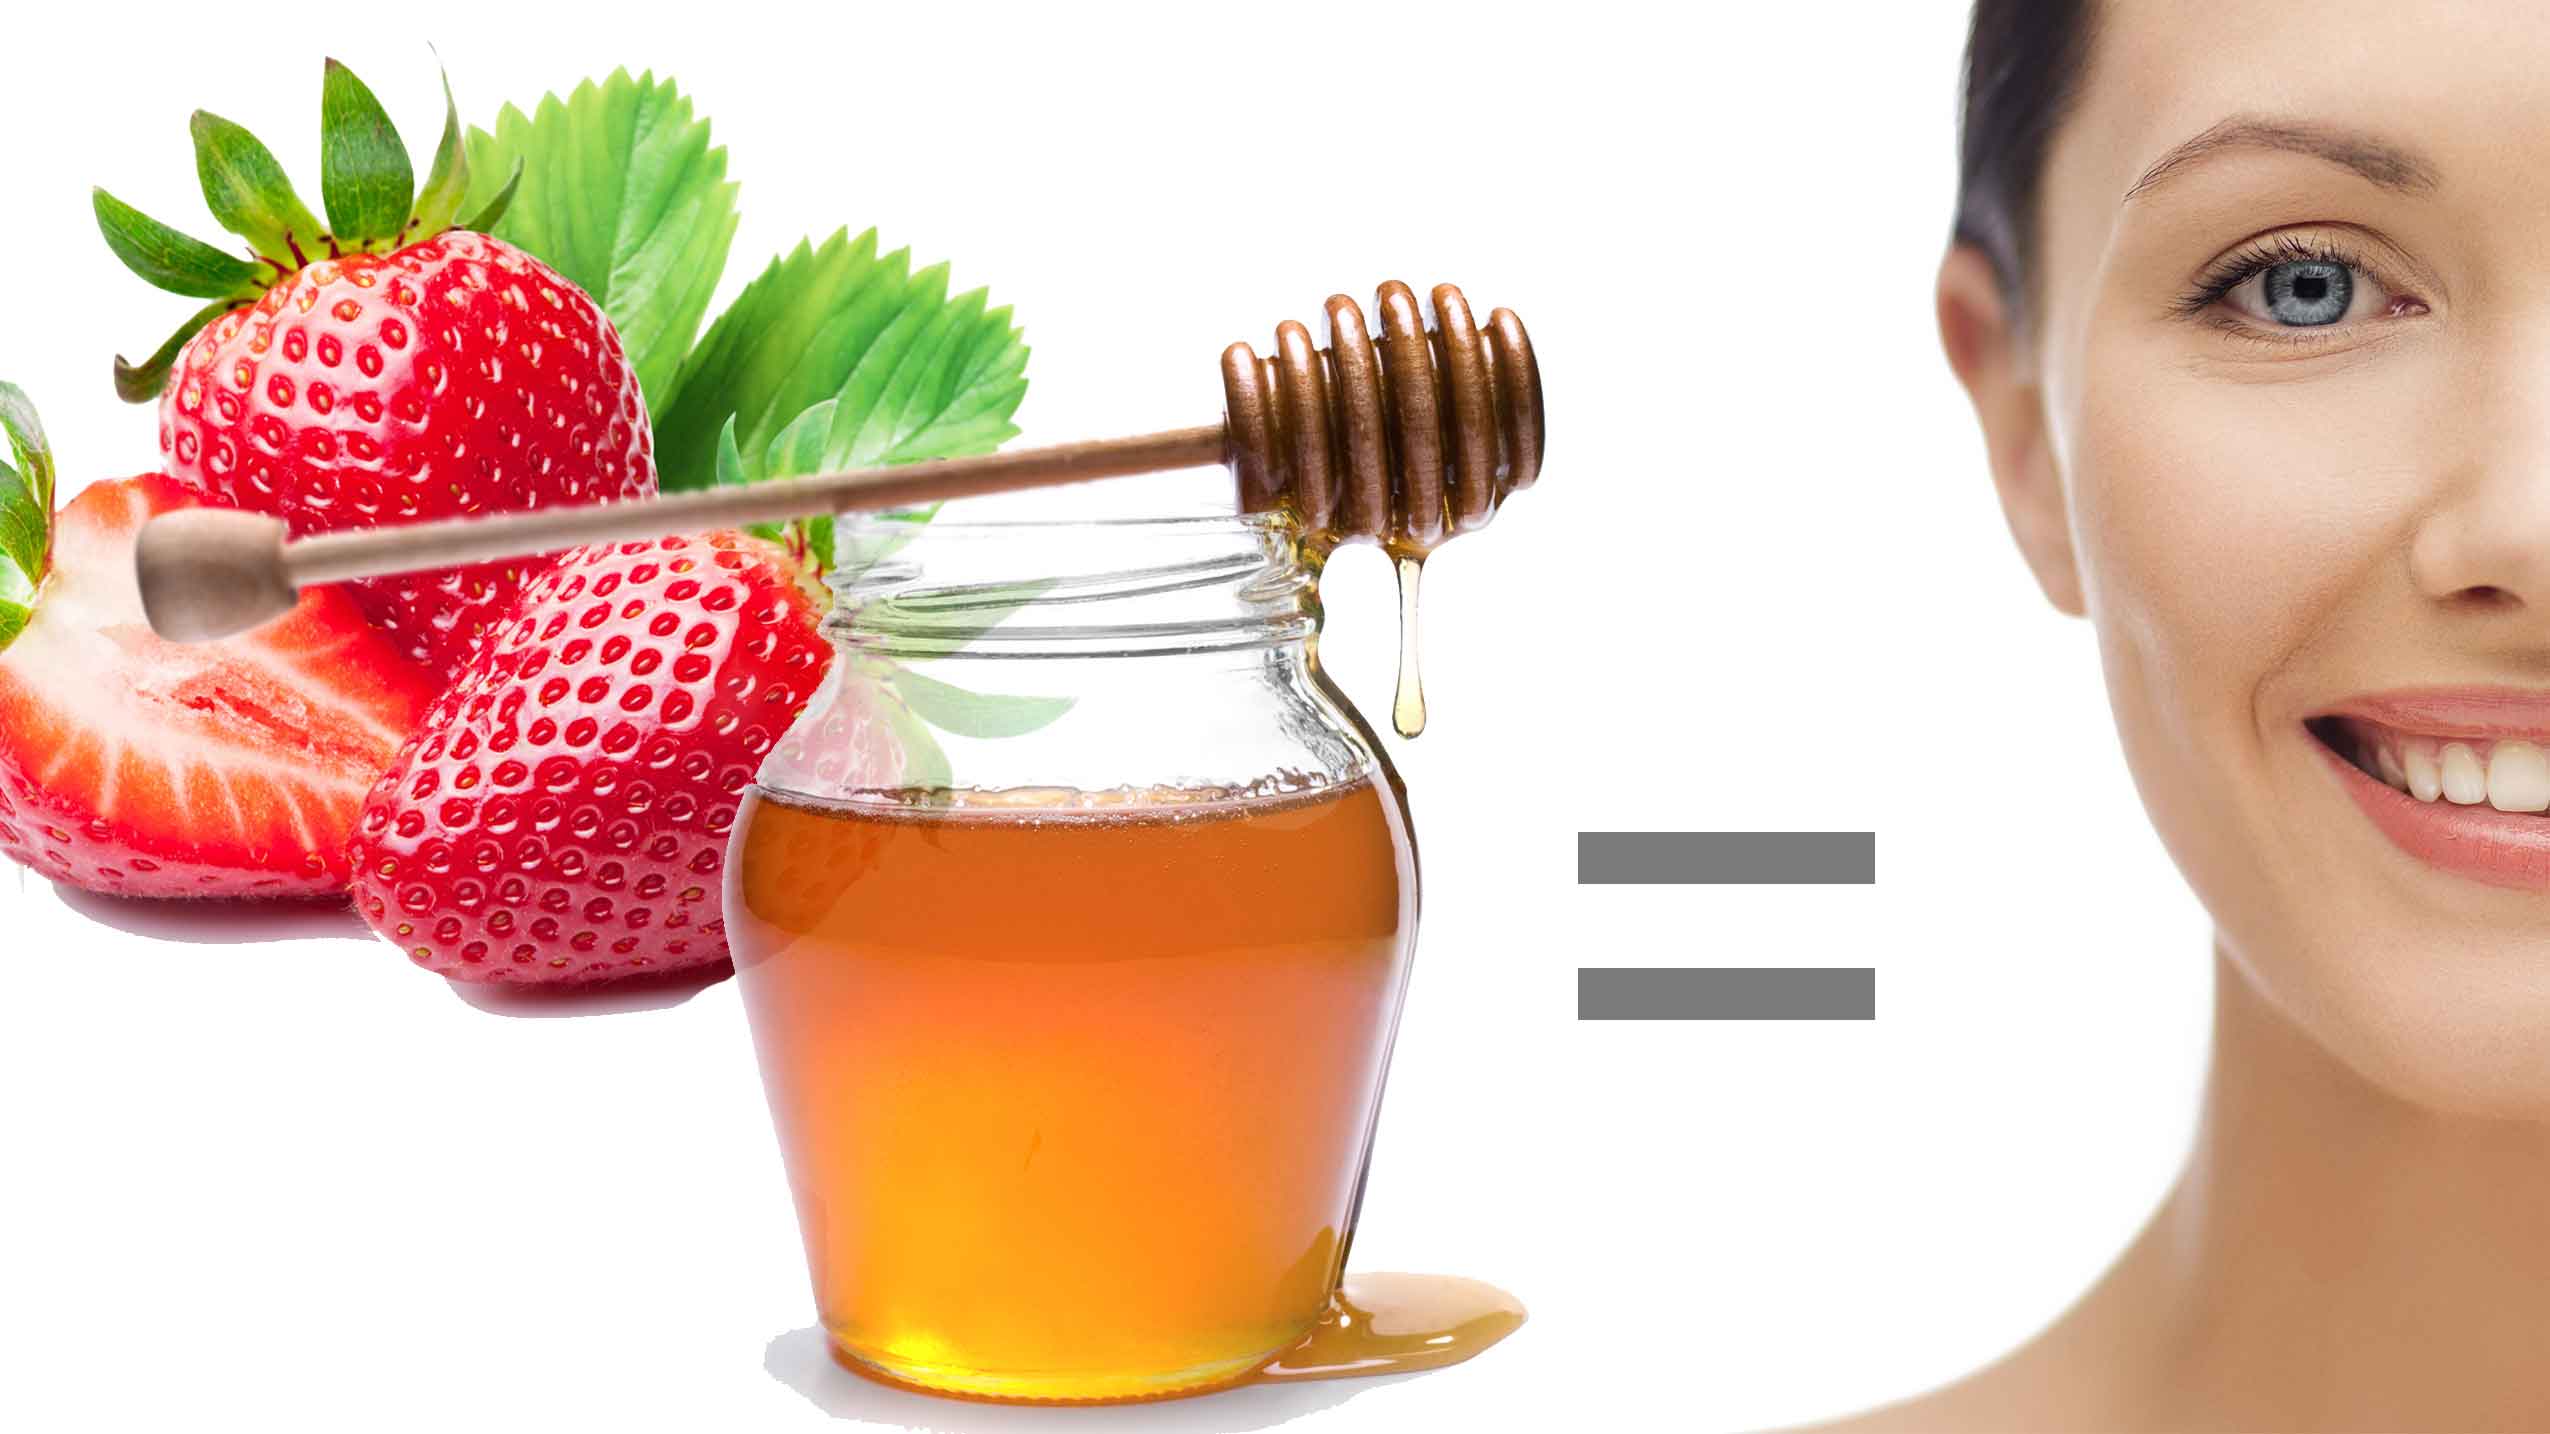 Strawberries and Honey to treat pimples